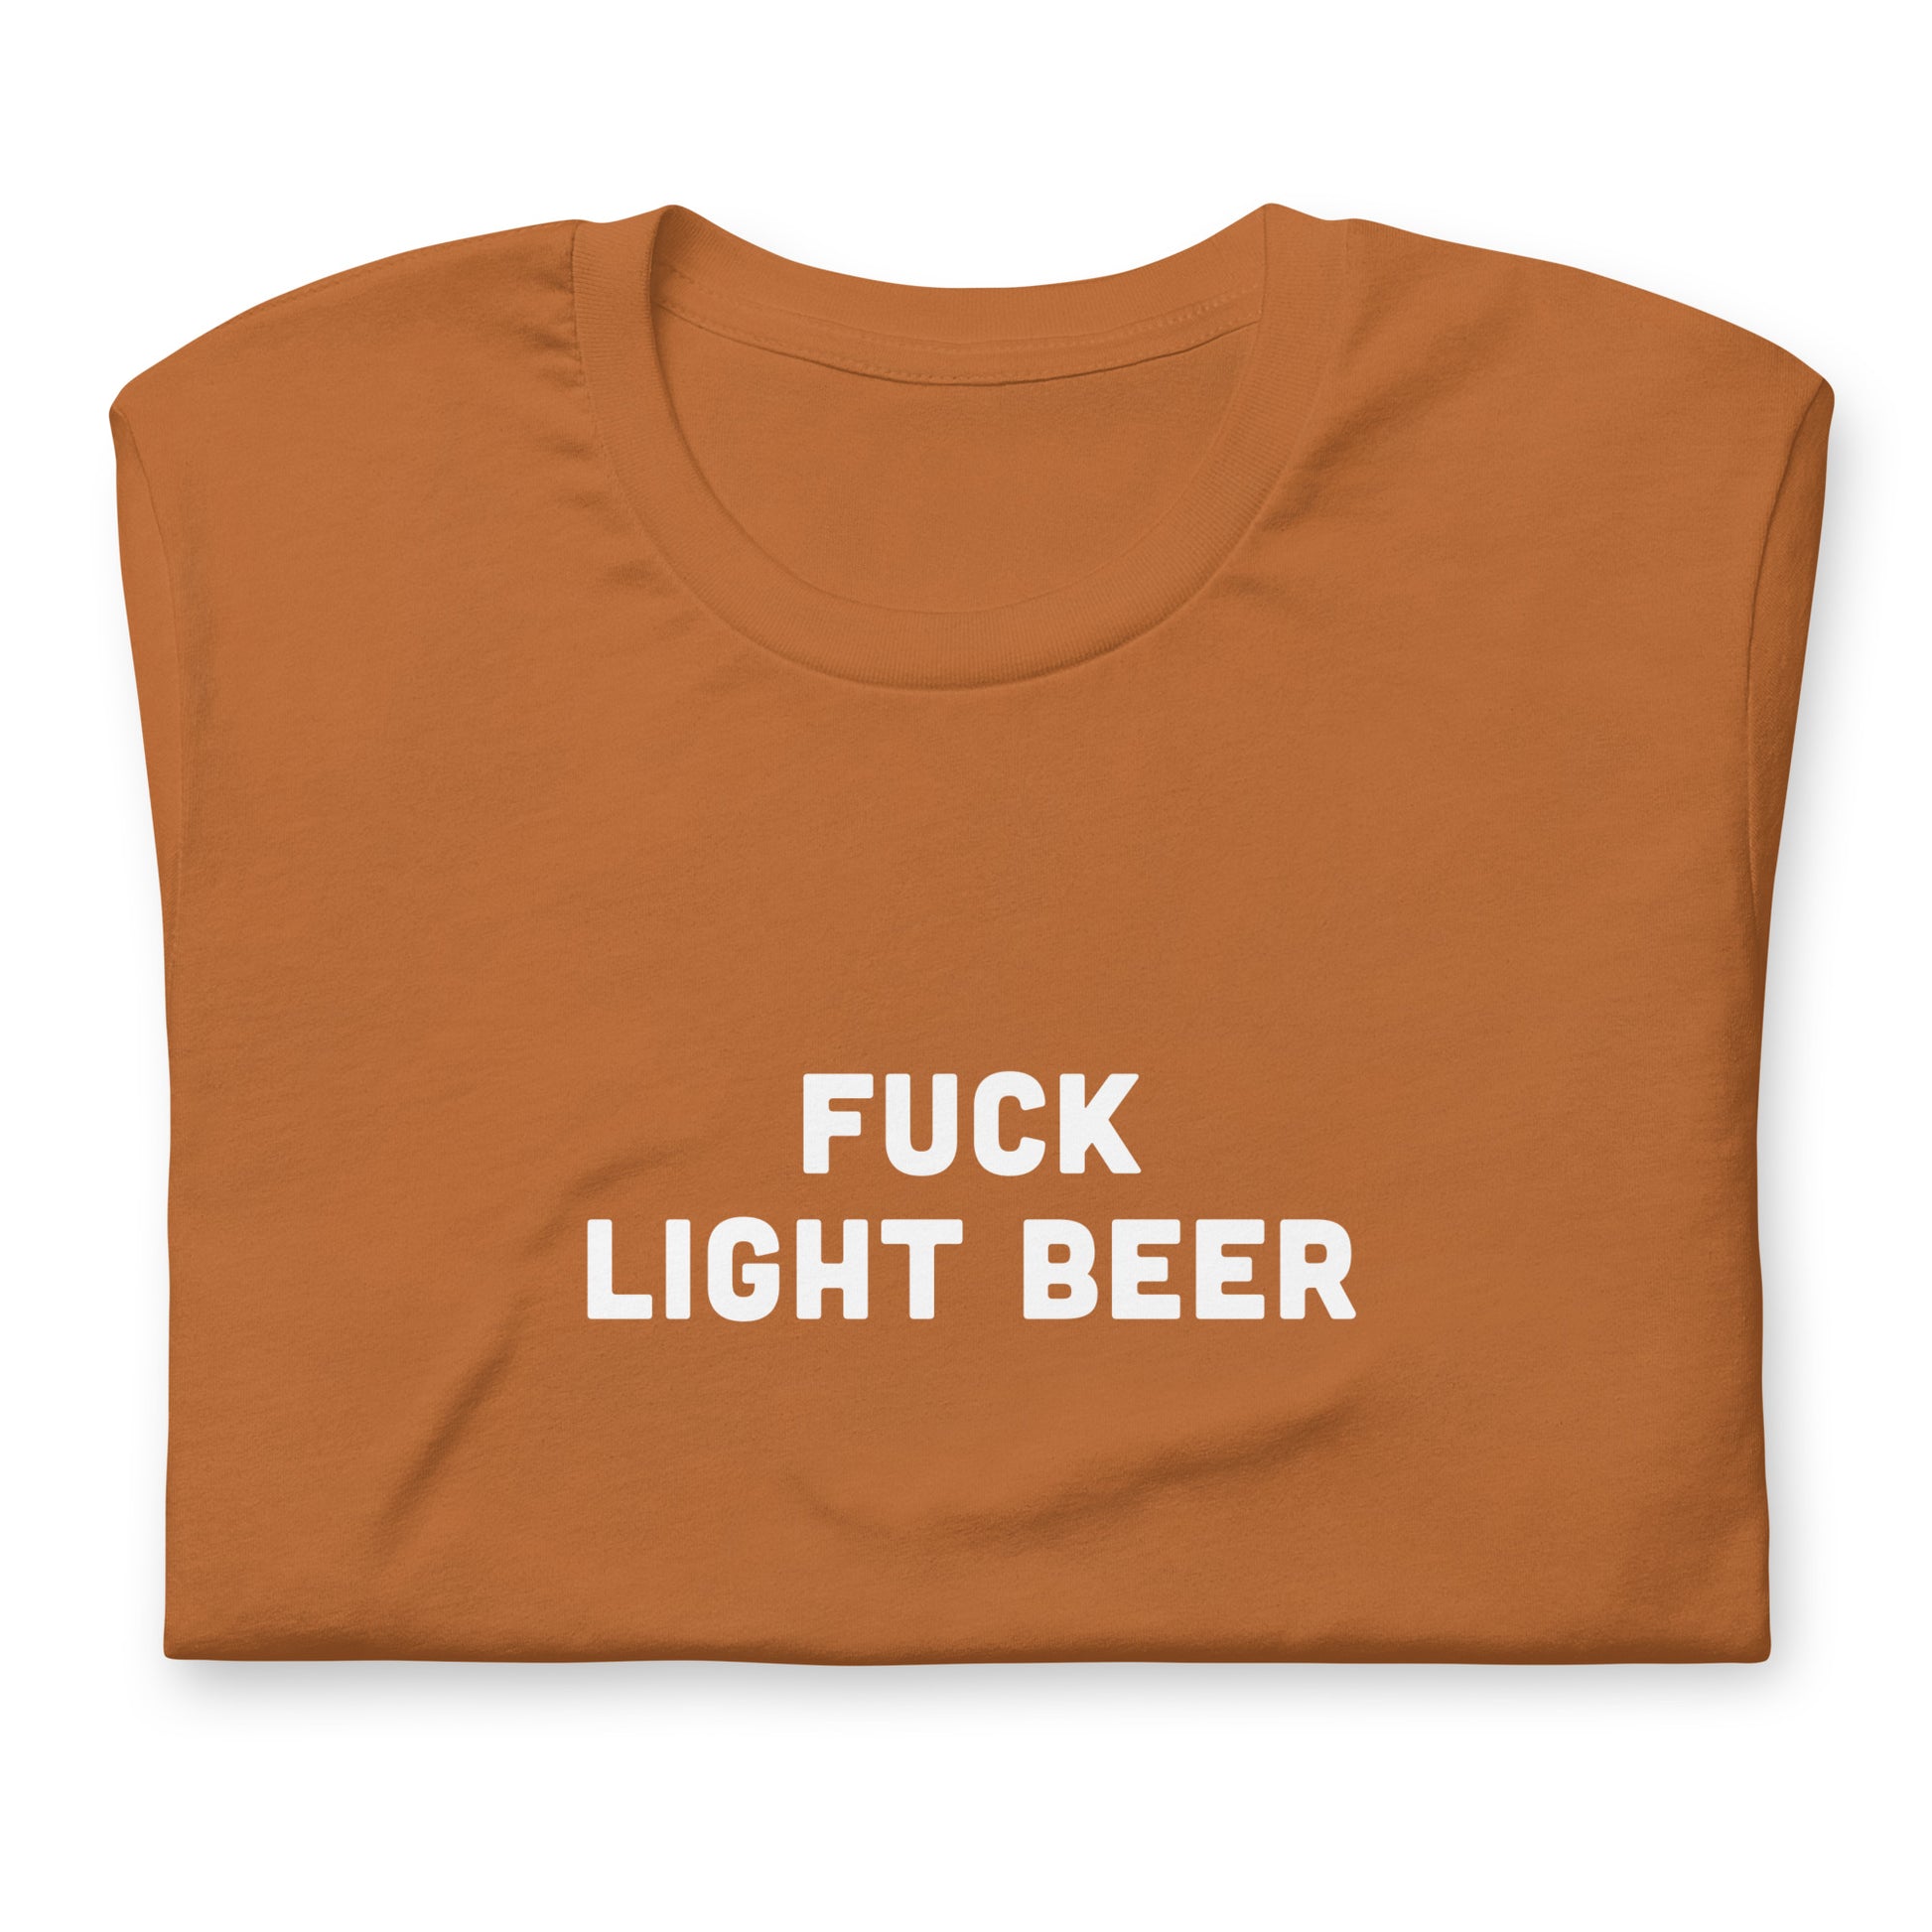 Fuck Light Beer T-Shirt Size XL Color Navy